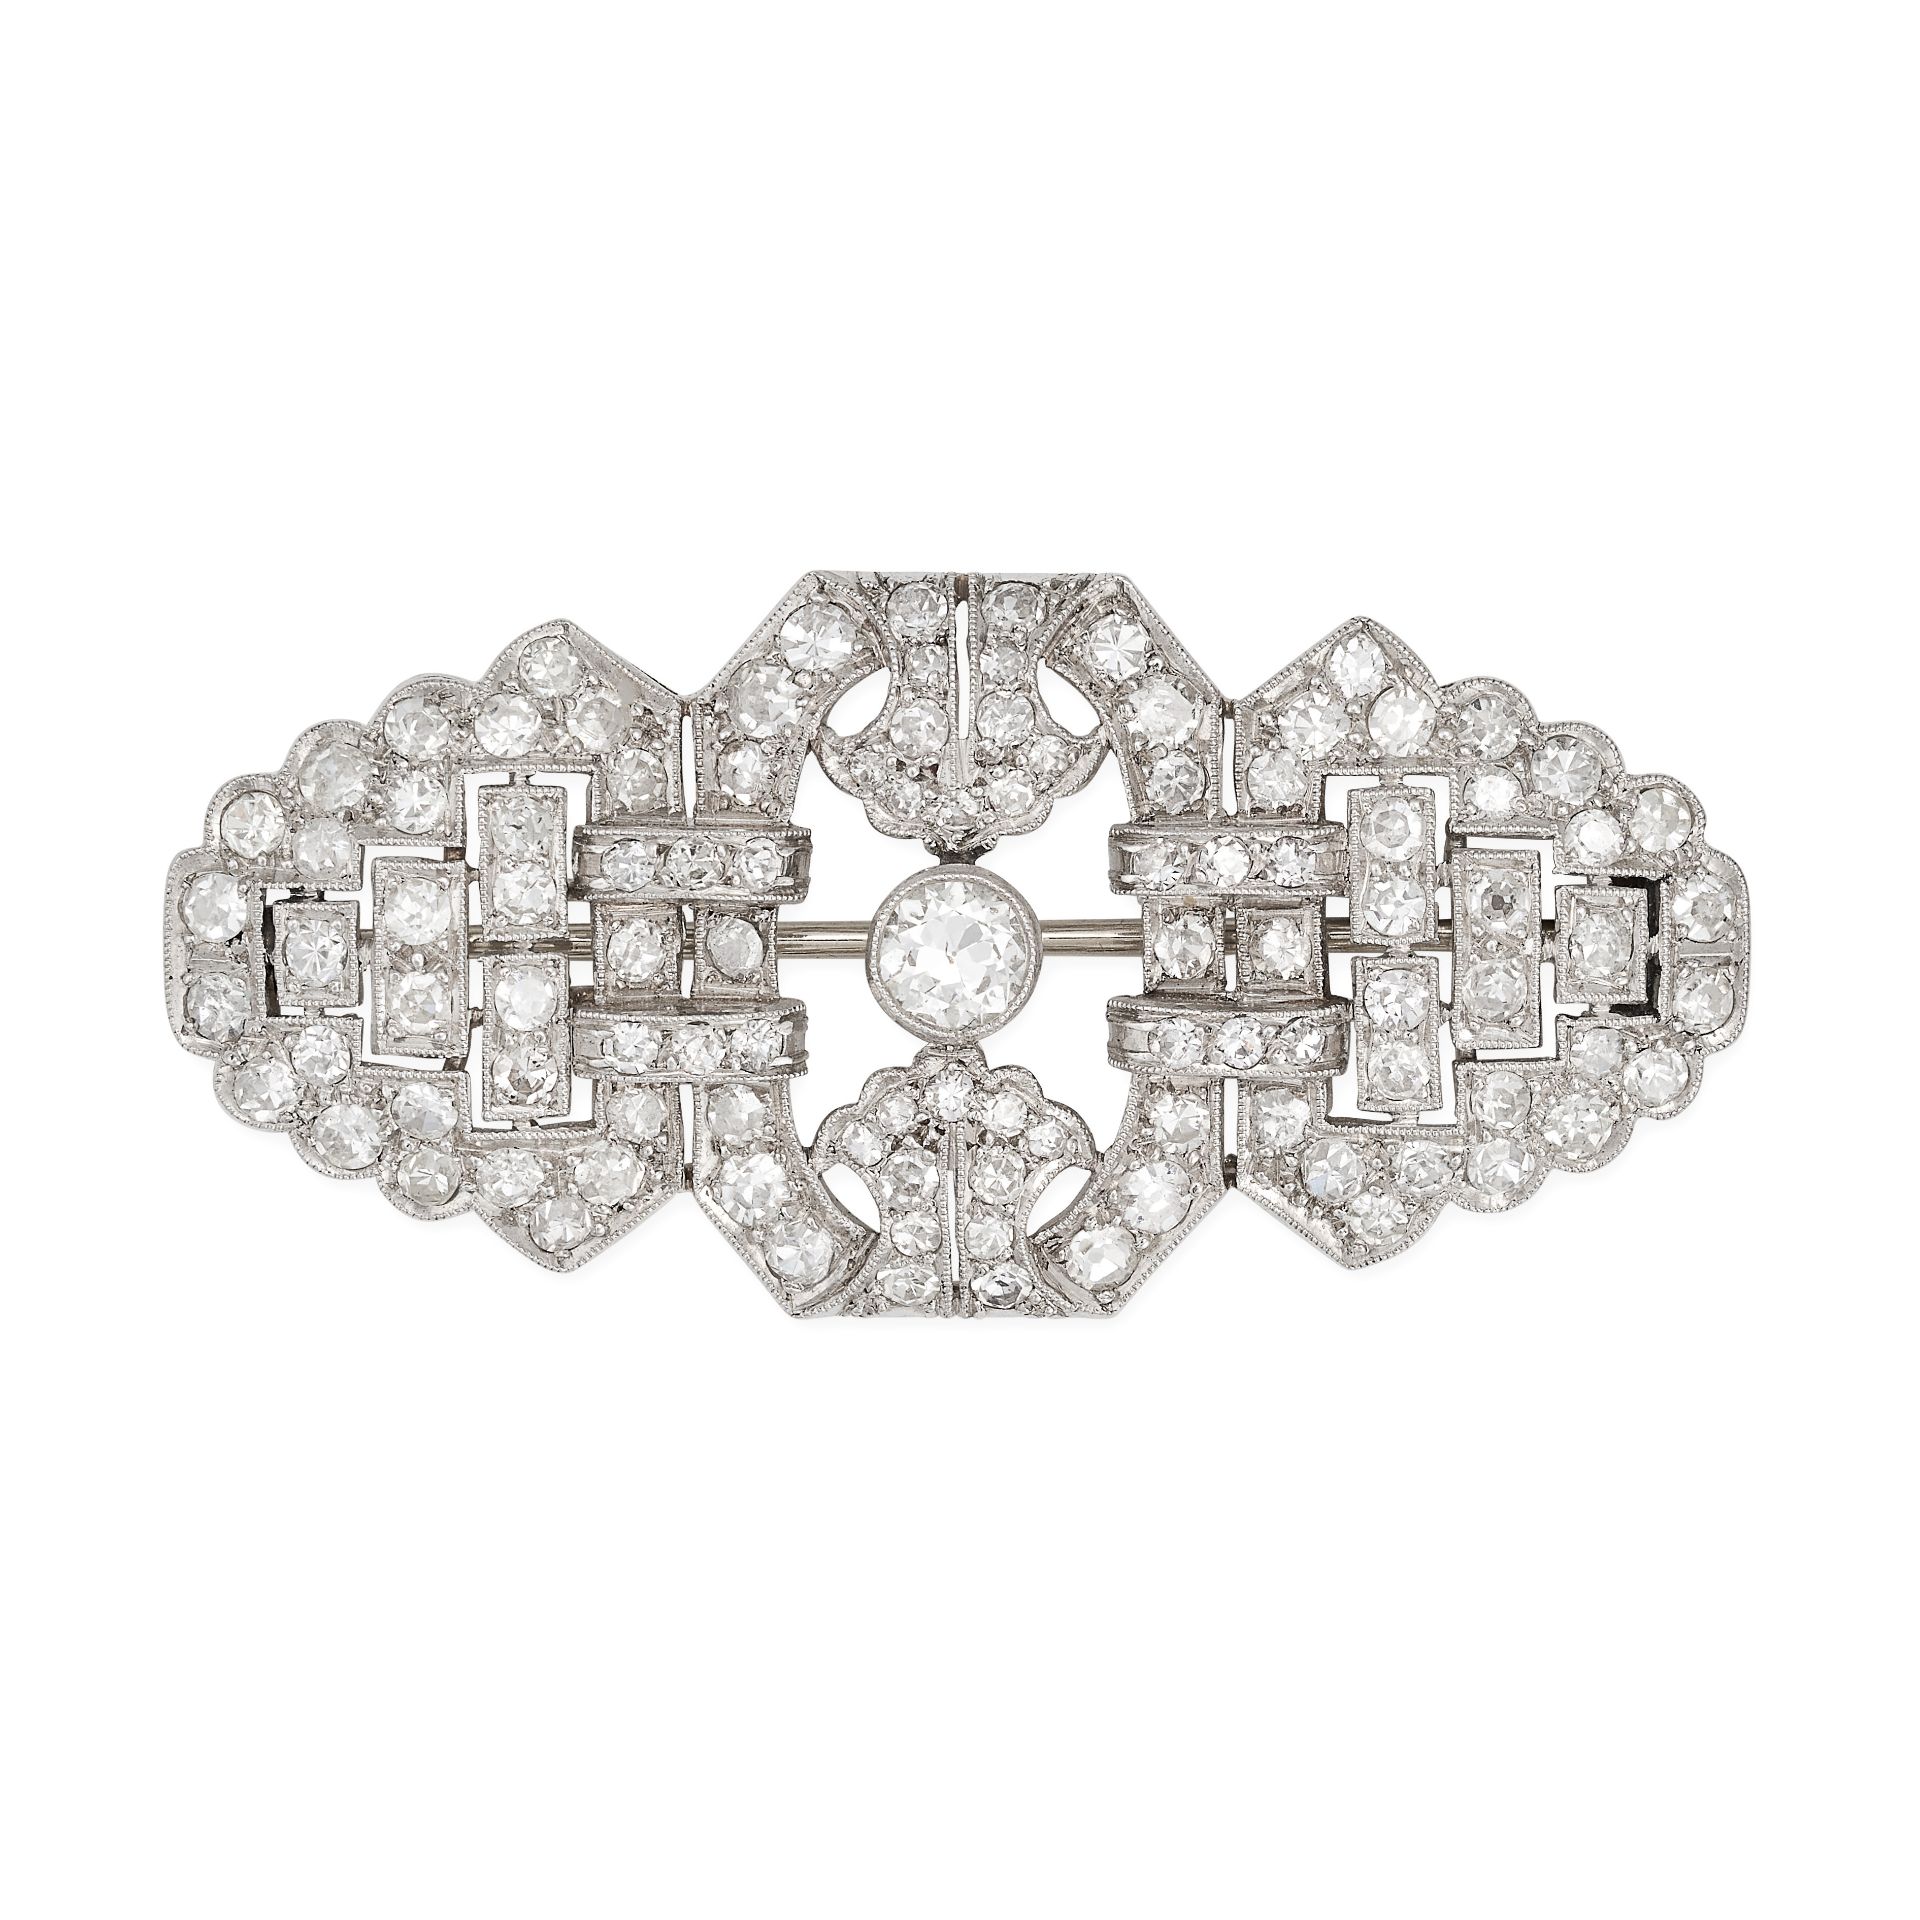 AN ANTIQUE ART DECO DIAMOND BROOCH in platinum, the openwork geometric brooch set throughout with...